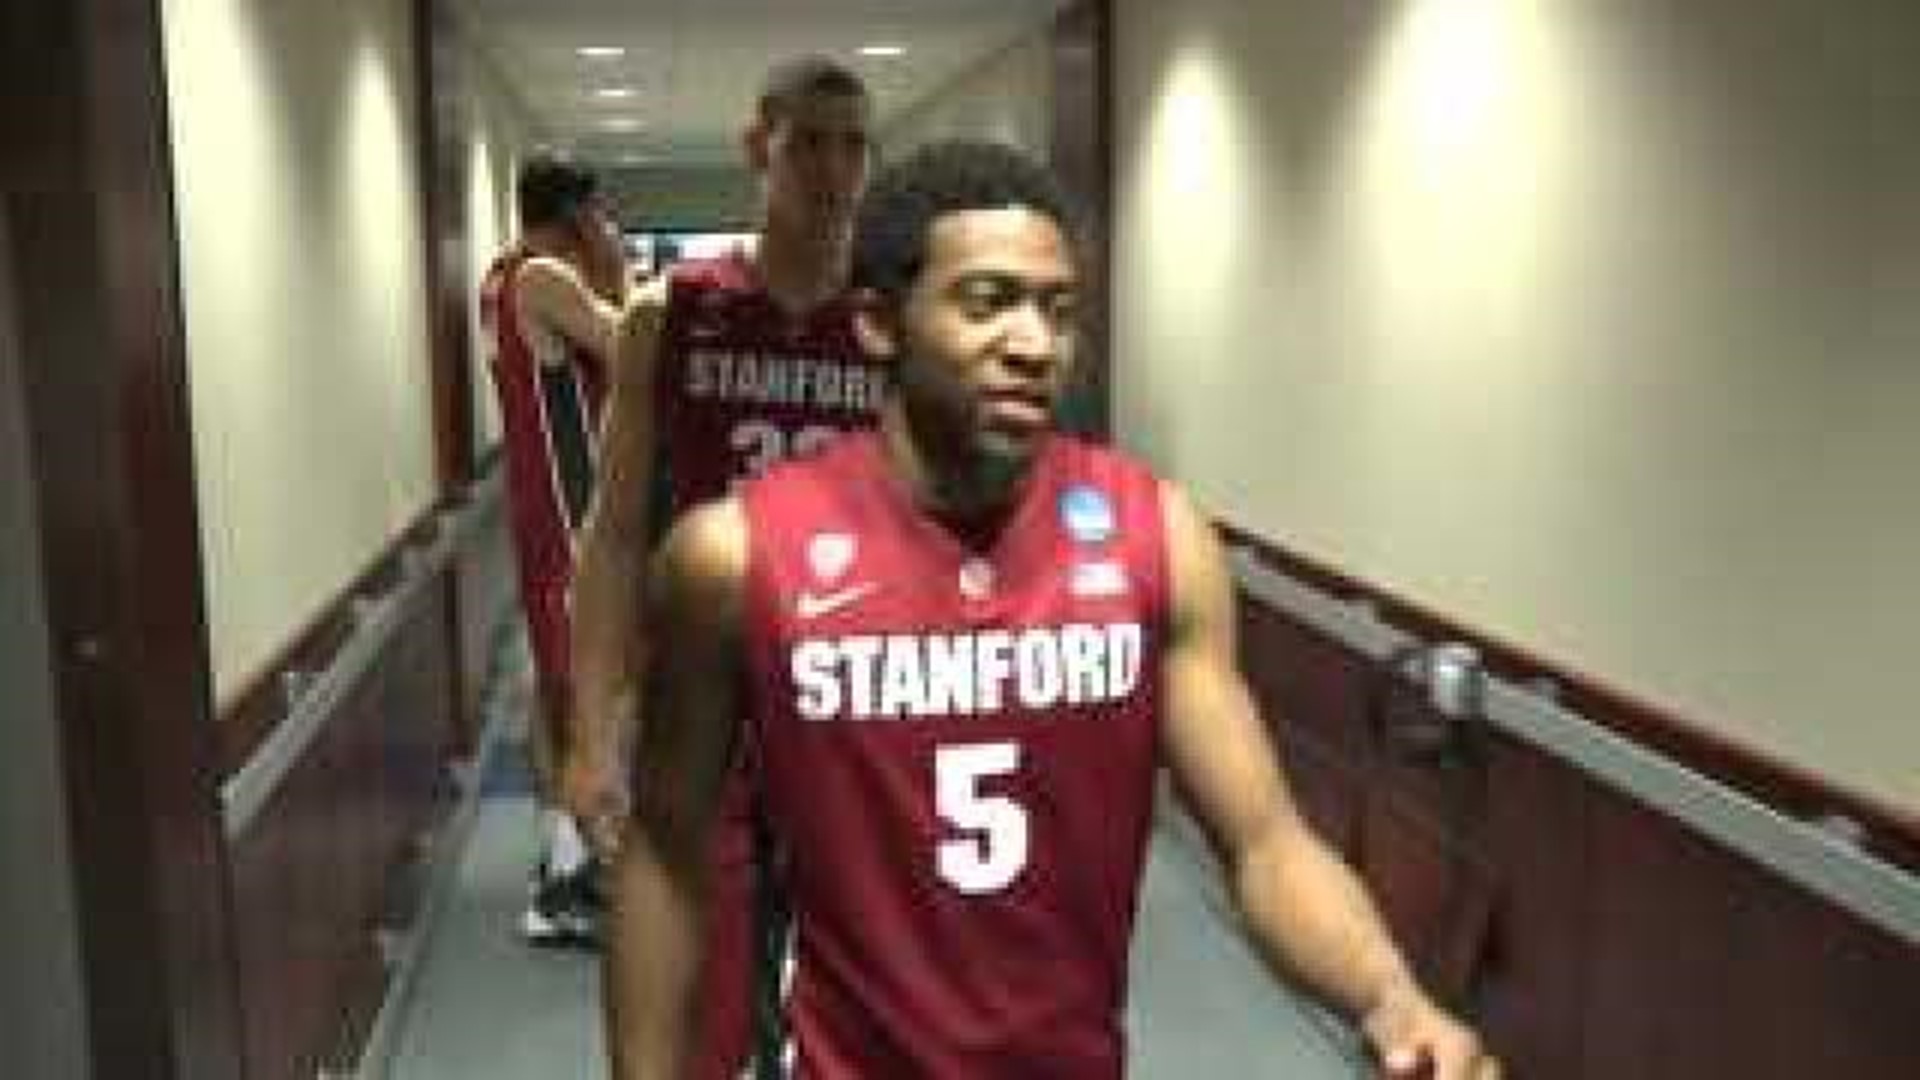 Chasson Randle and Stanford Move Into Sweet 16